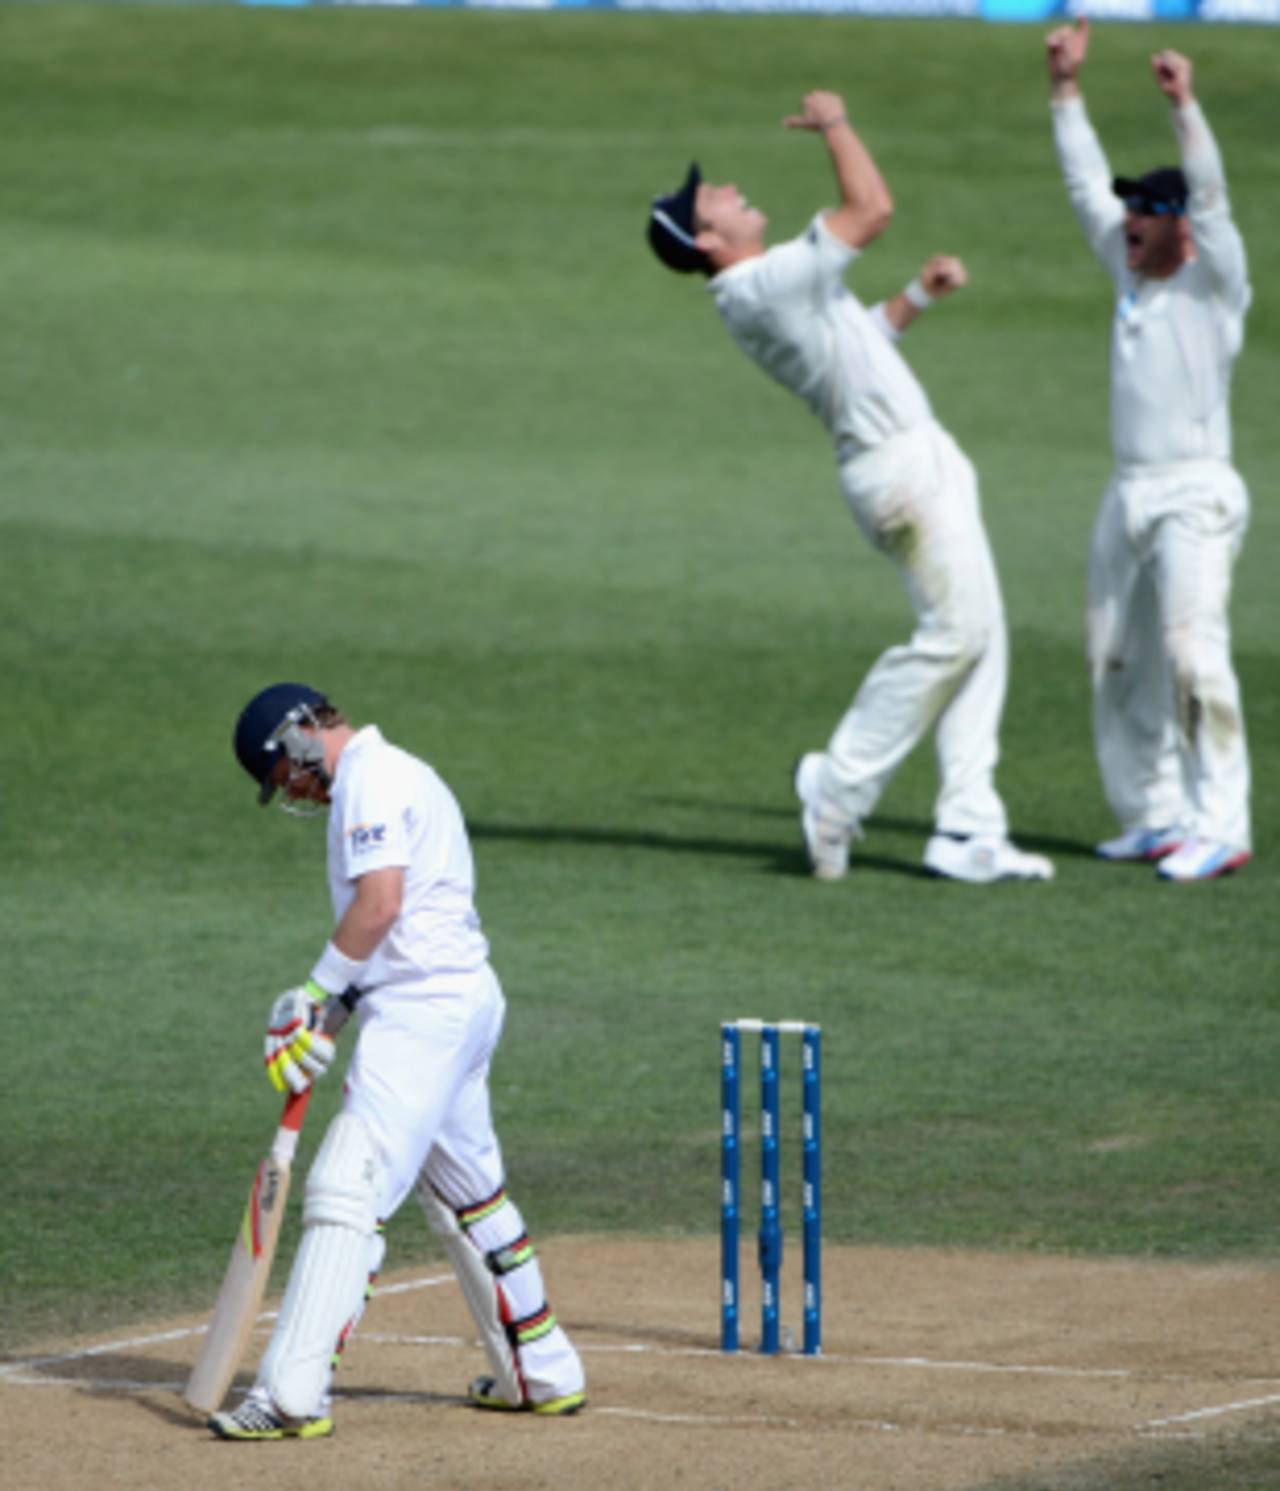 Ian Bell was dismissed on the stroke of tea for 75, after being dropped by Dean Brownlie before lunch.&nbsp;&nbsp;&bull;&nbsp;&nbsp;Getty Images